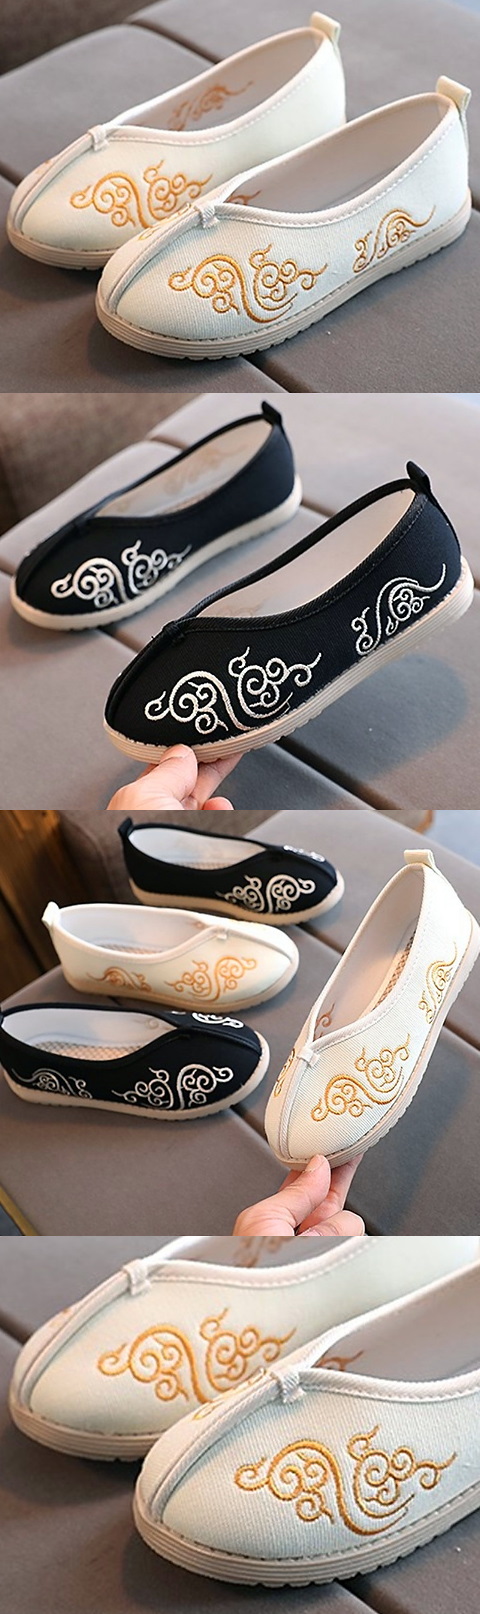 Kids' Embroidery Round Opening Cloth Shoes